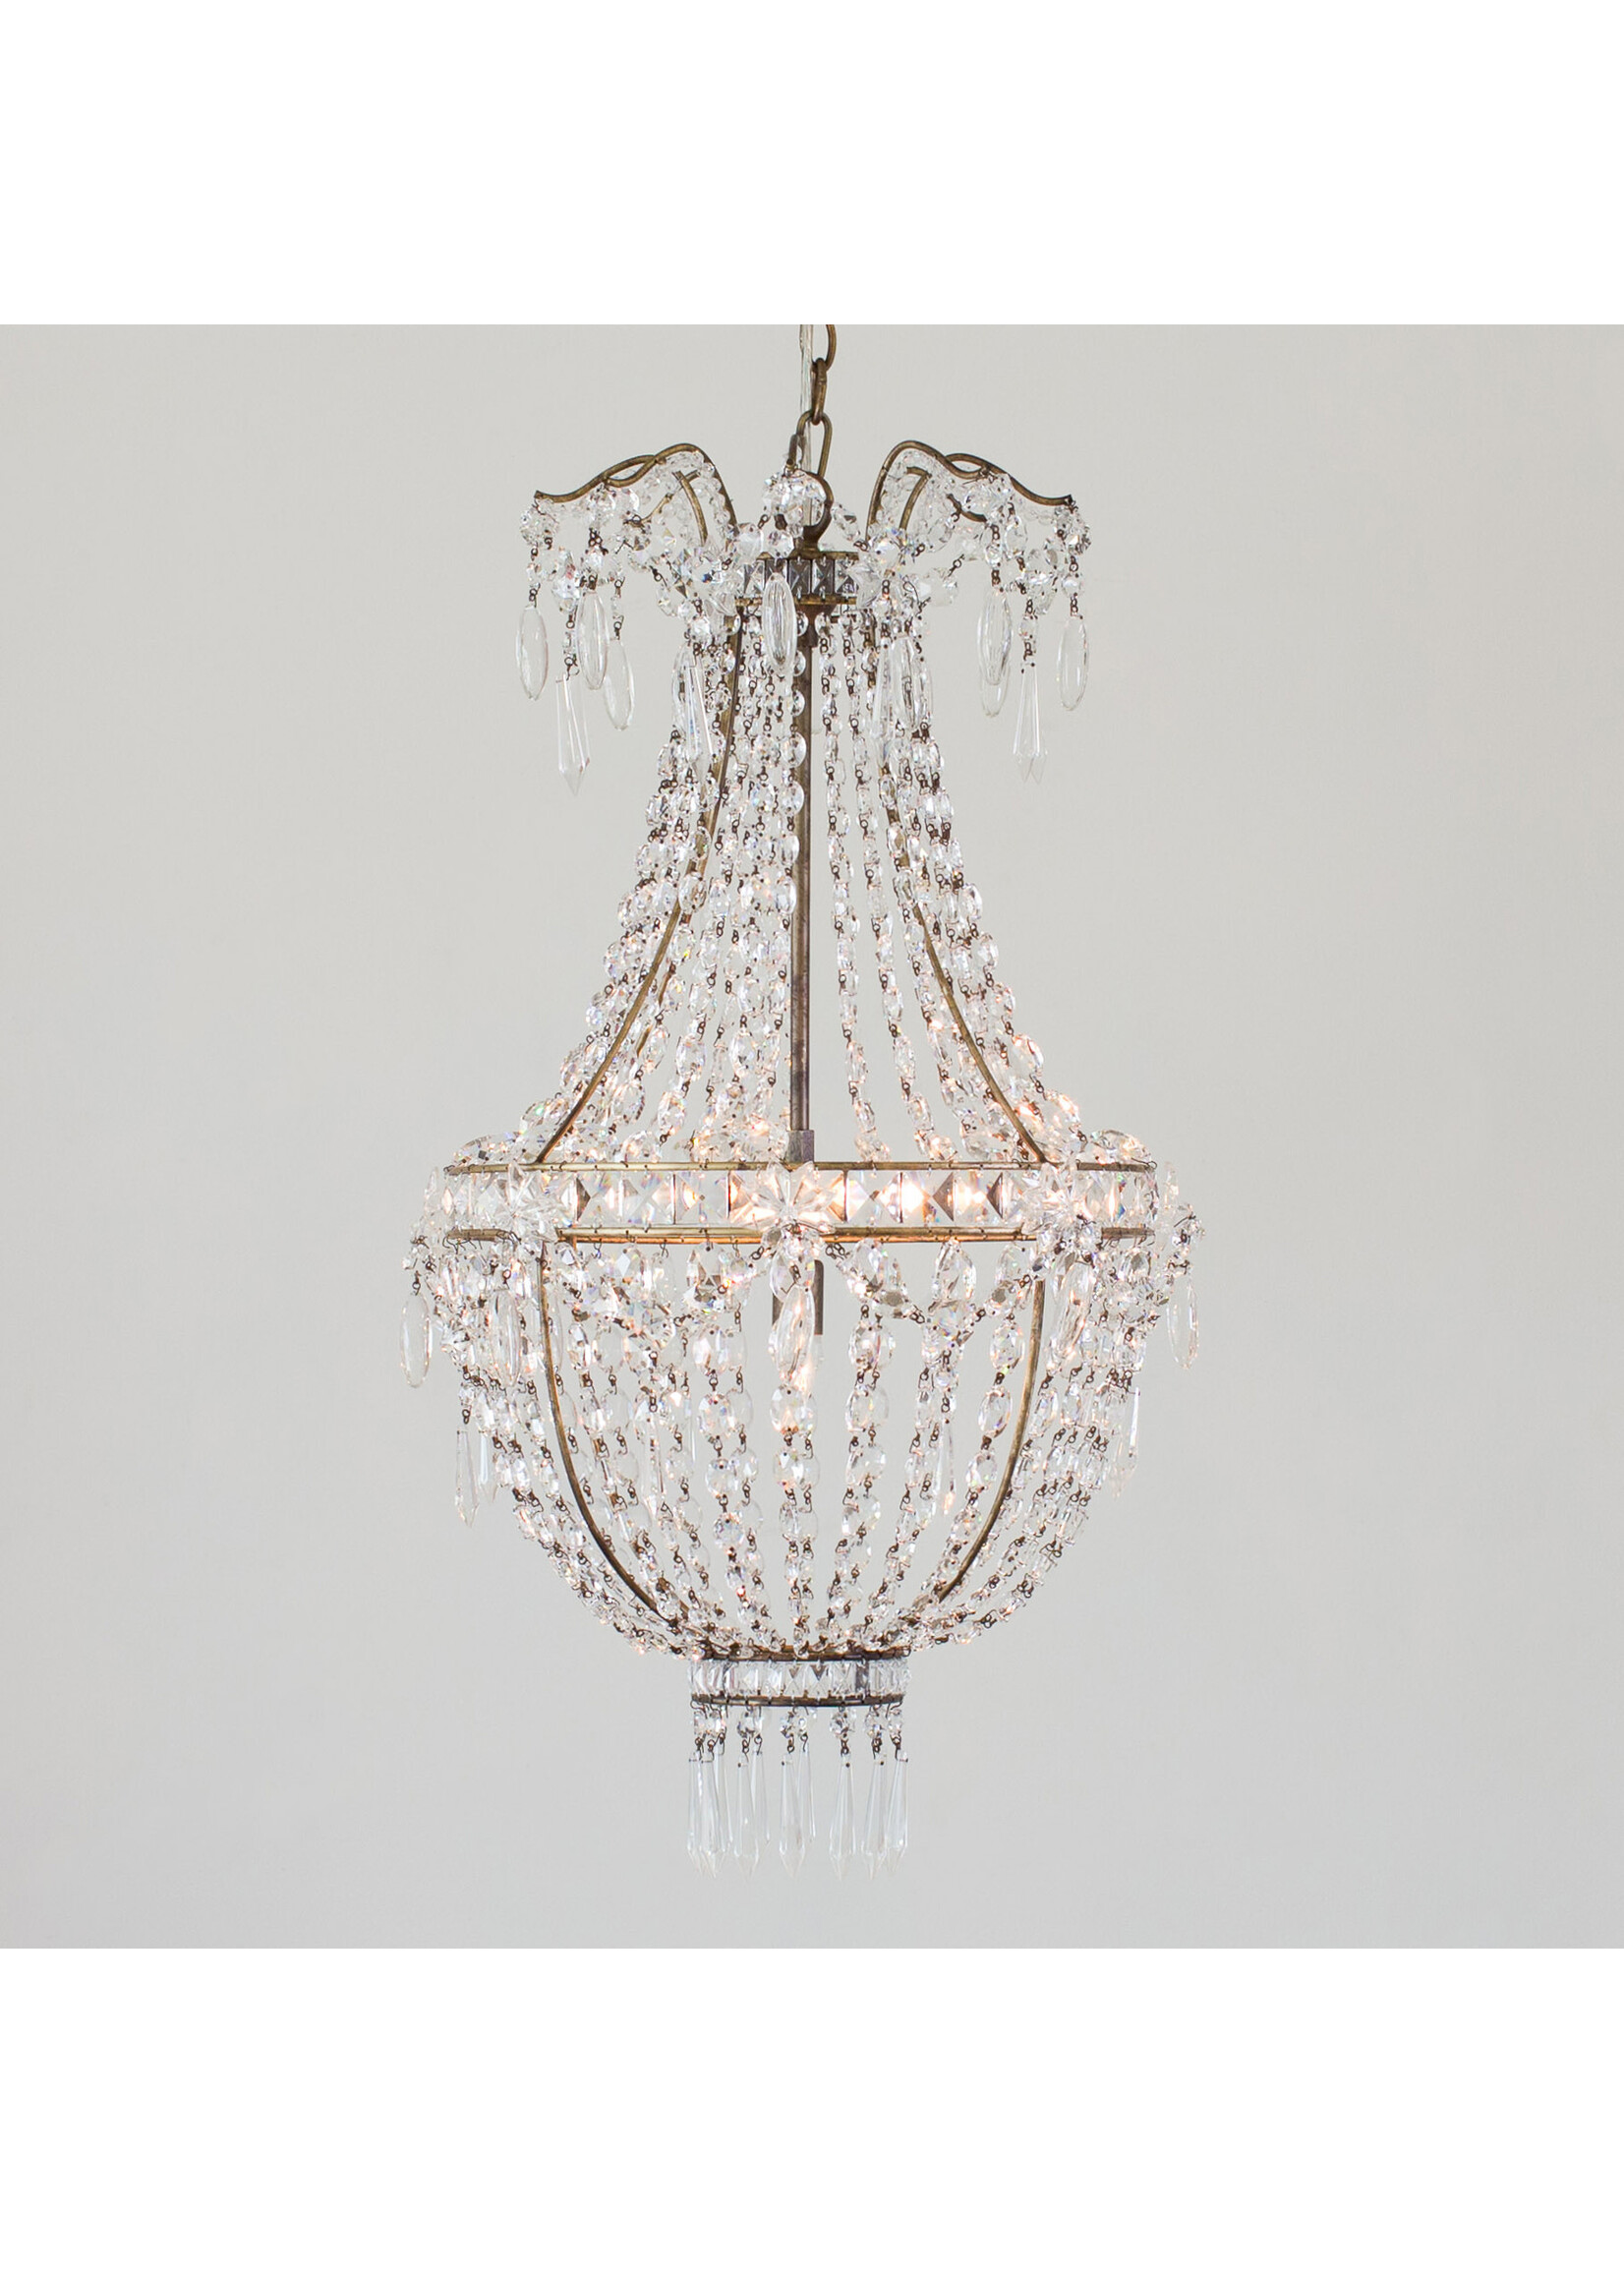 Rocca Chandelier in Burnished Iron Finish